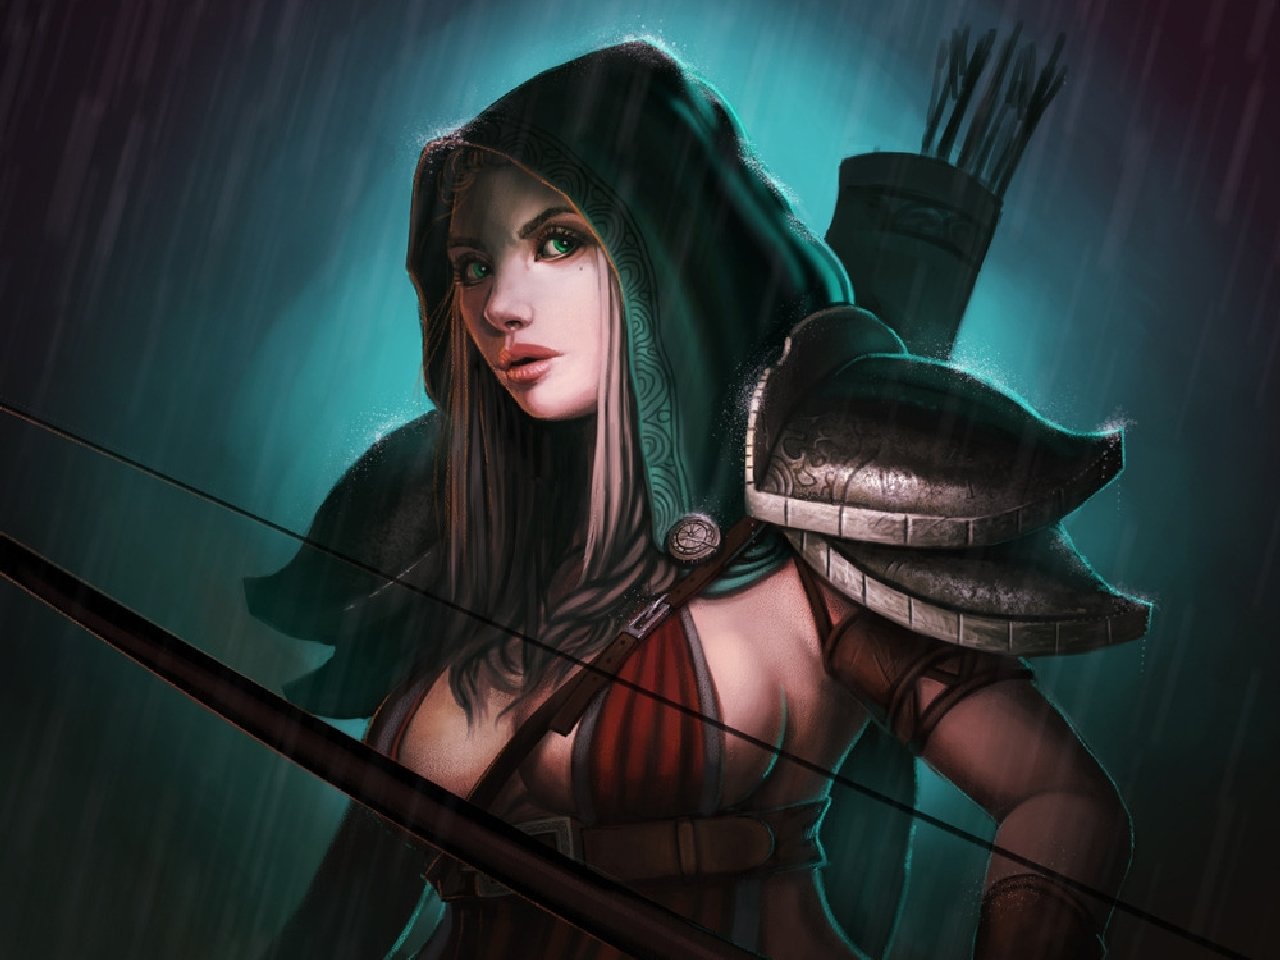 Fantasy Archer Picture by a href="https://alphacoders.com/author/view/...